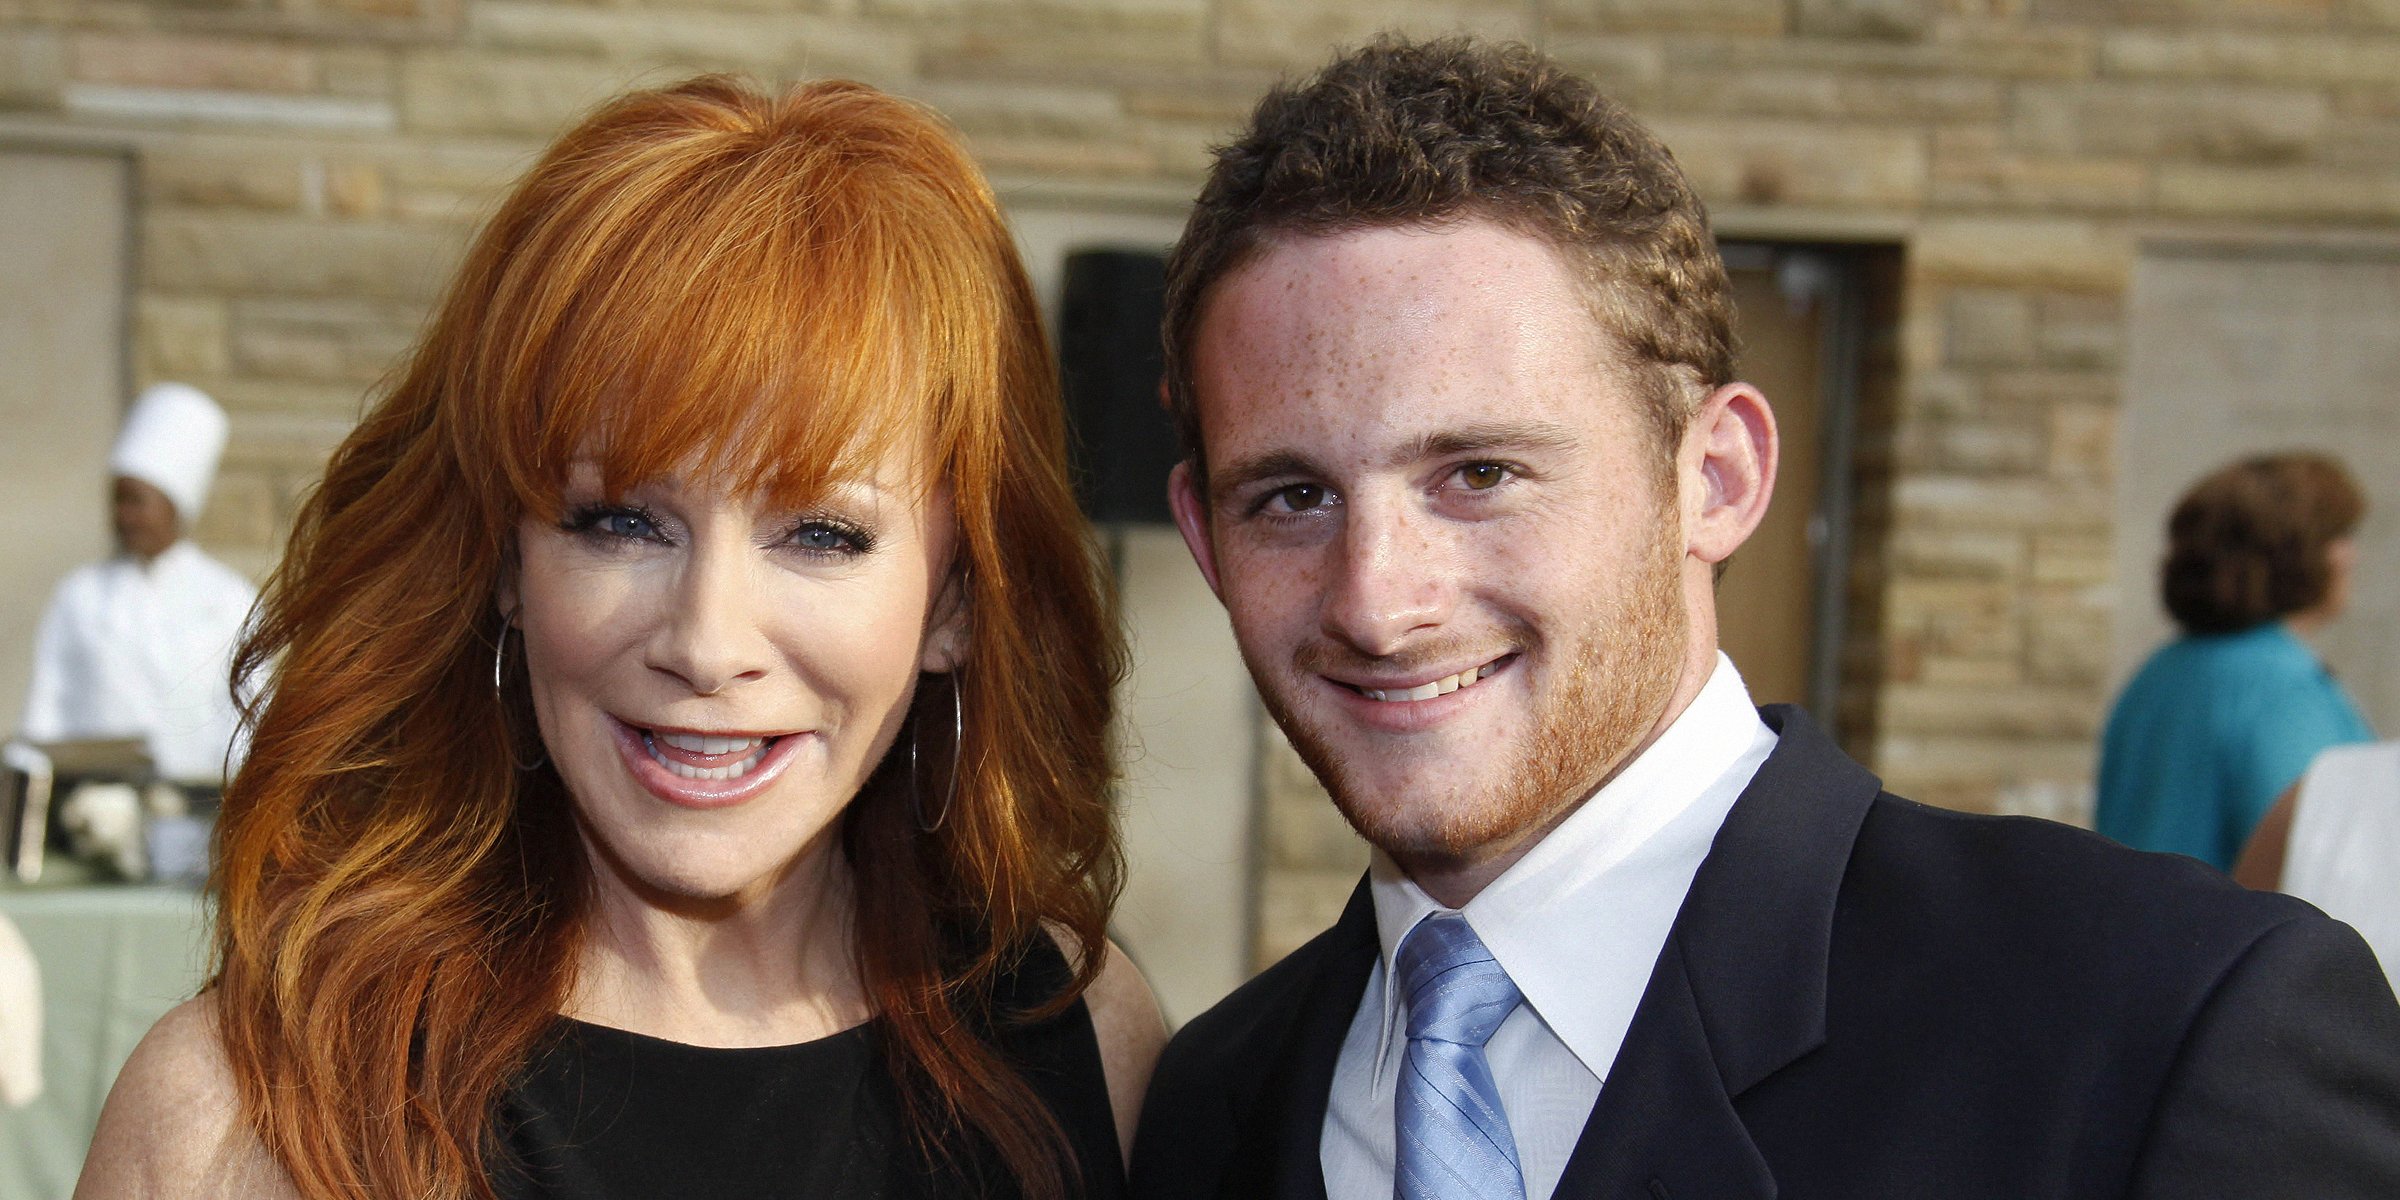 Reba McEntire and Shelby Blackstock | Source: Getty Images